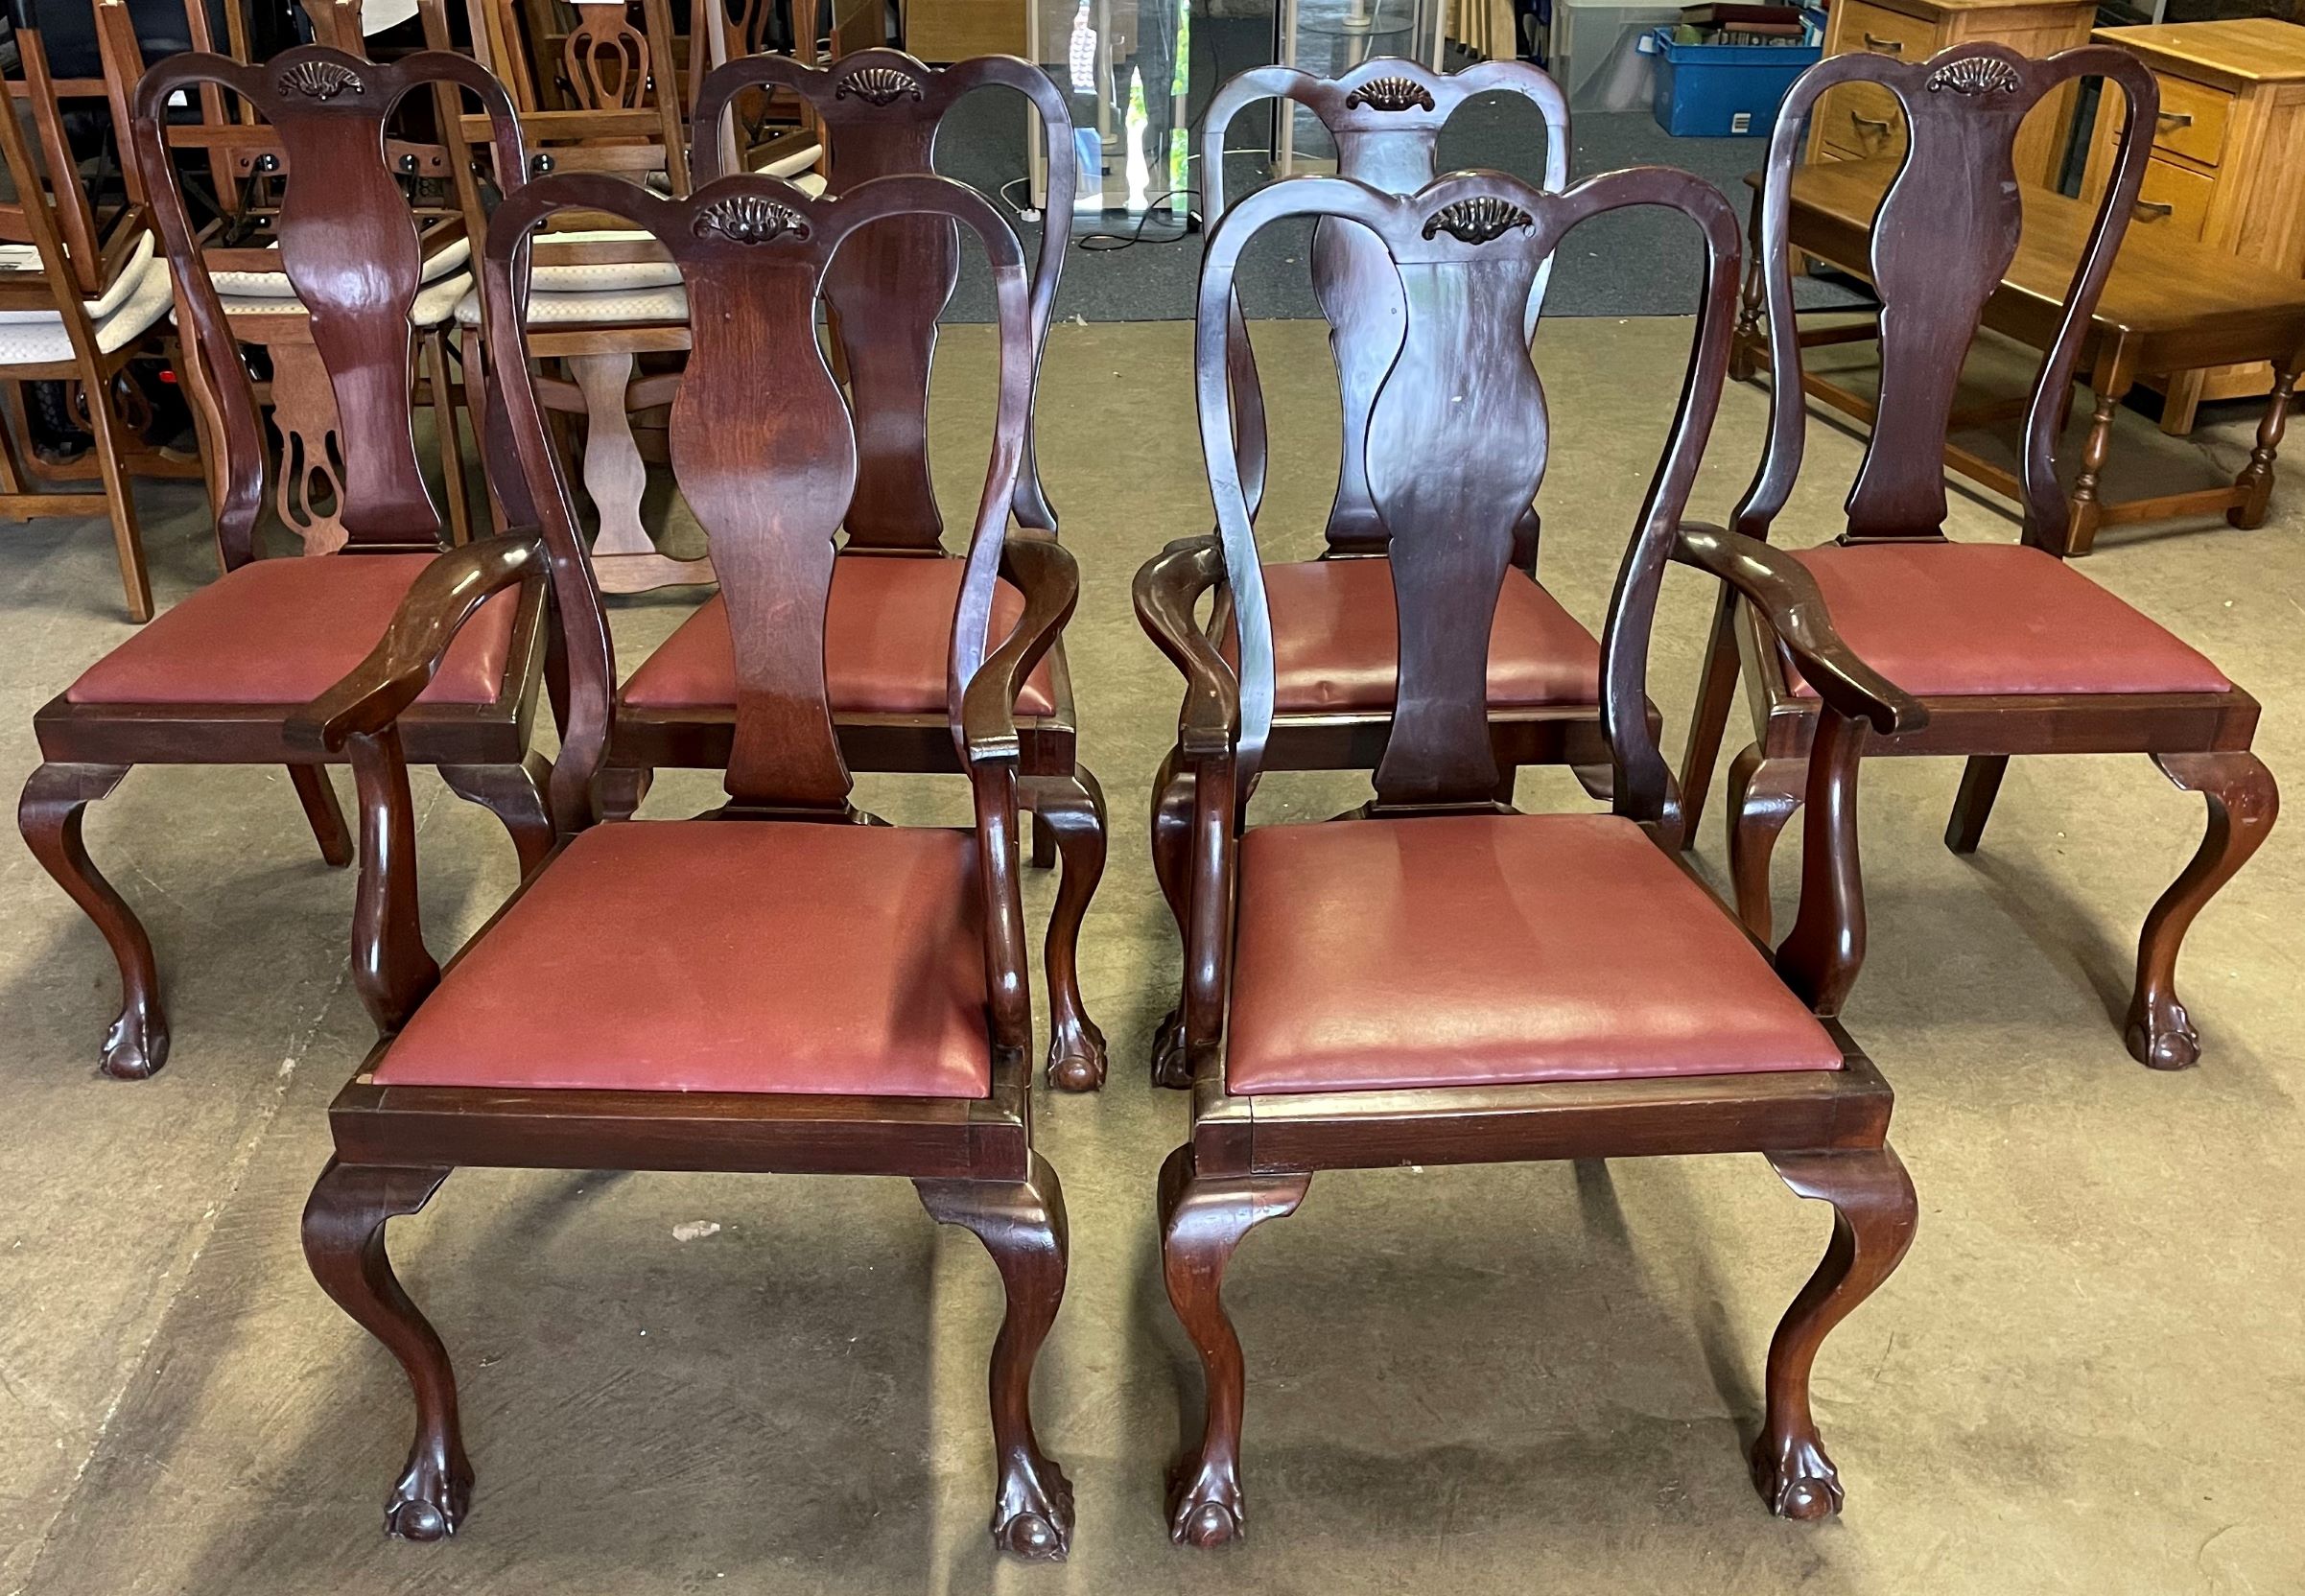 Set of 6 early 20th century mahogany Queen Anne style dining chairs including 2 carvers with leather